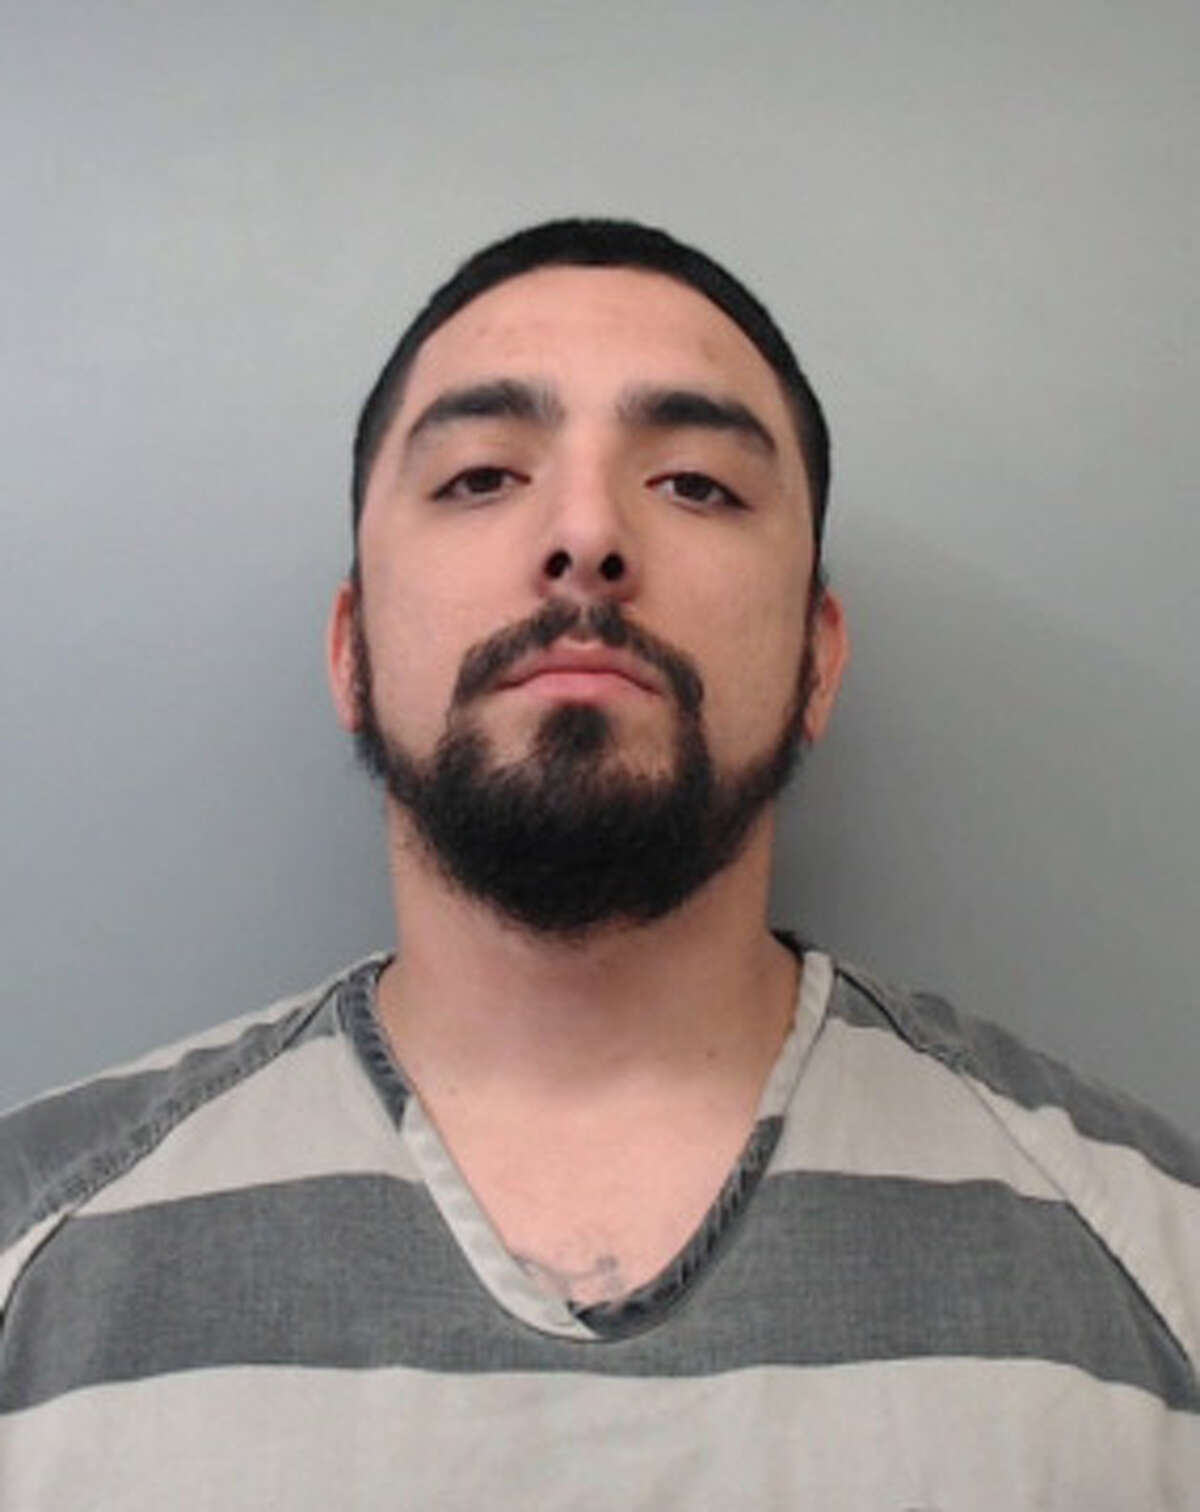 Justin Sanchez, 28, was charged with two counts of injury to a child. Sanchez was also served an arrest warrant that charged him with theft in a separate incident.